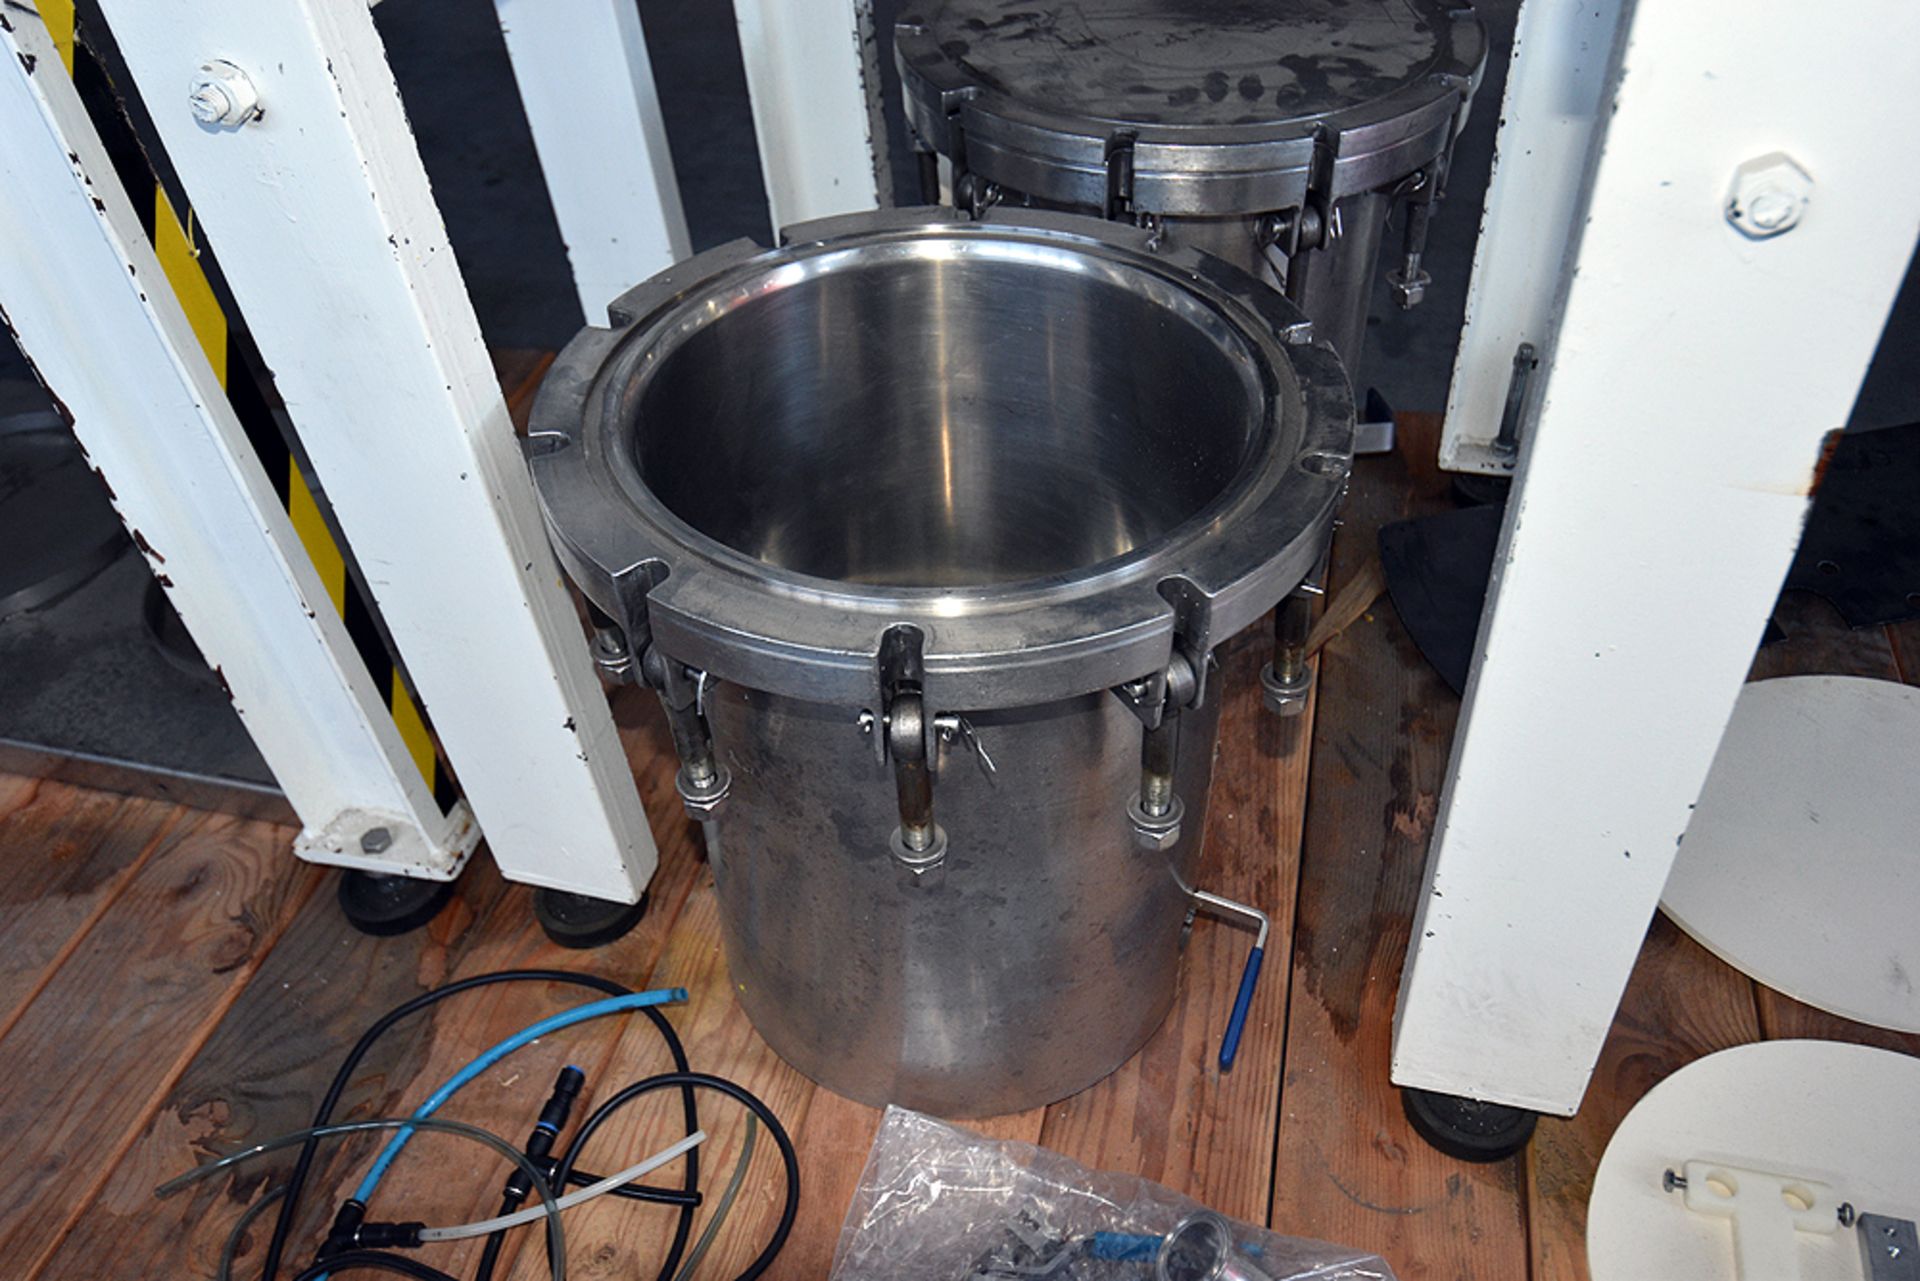 Group of (2) Nordson 5 Liter, Stainless Steel Pressure Pots Mounted on Custom Stand - Image 7 of 13